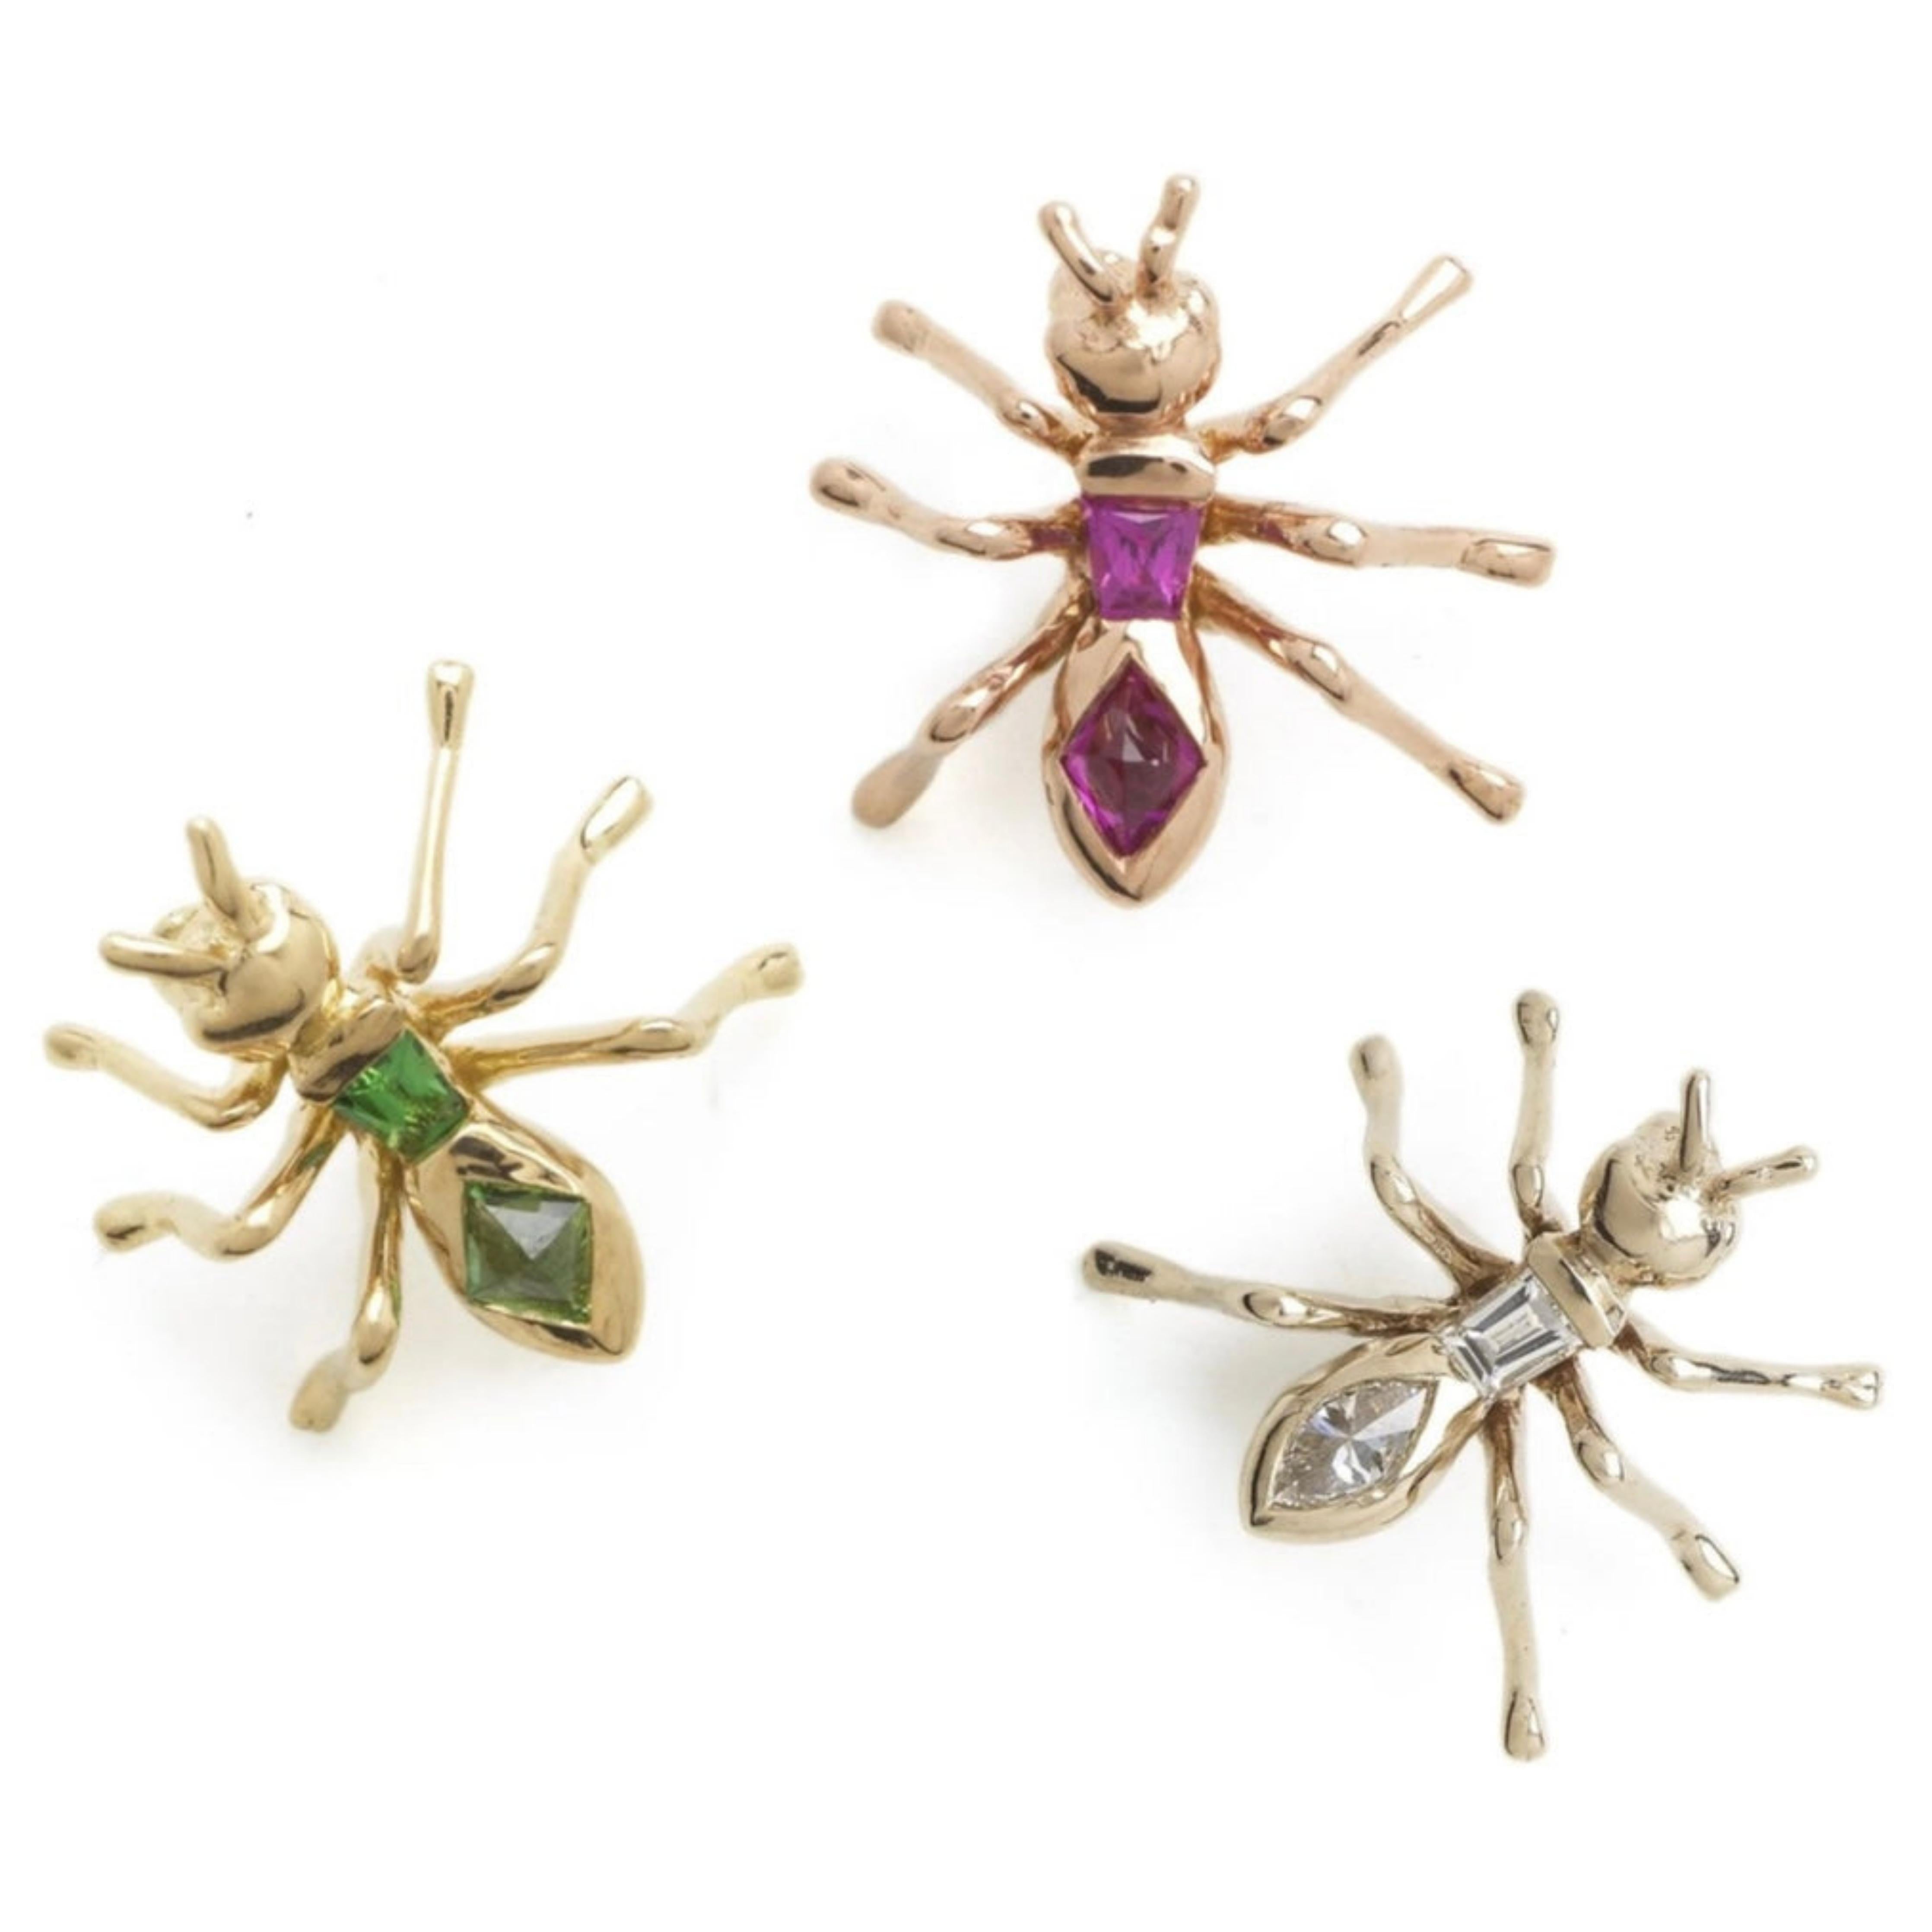 Bibi van der Velden Ant Single Stud Earring - Green Tsavorite. Sculptural single earring in the shape of an ant with two pink sapphire stones forming the body. Photo showing different colored stone options.